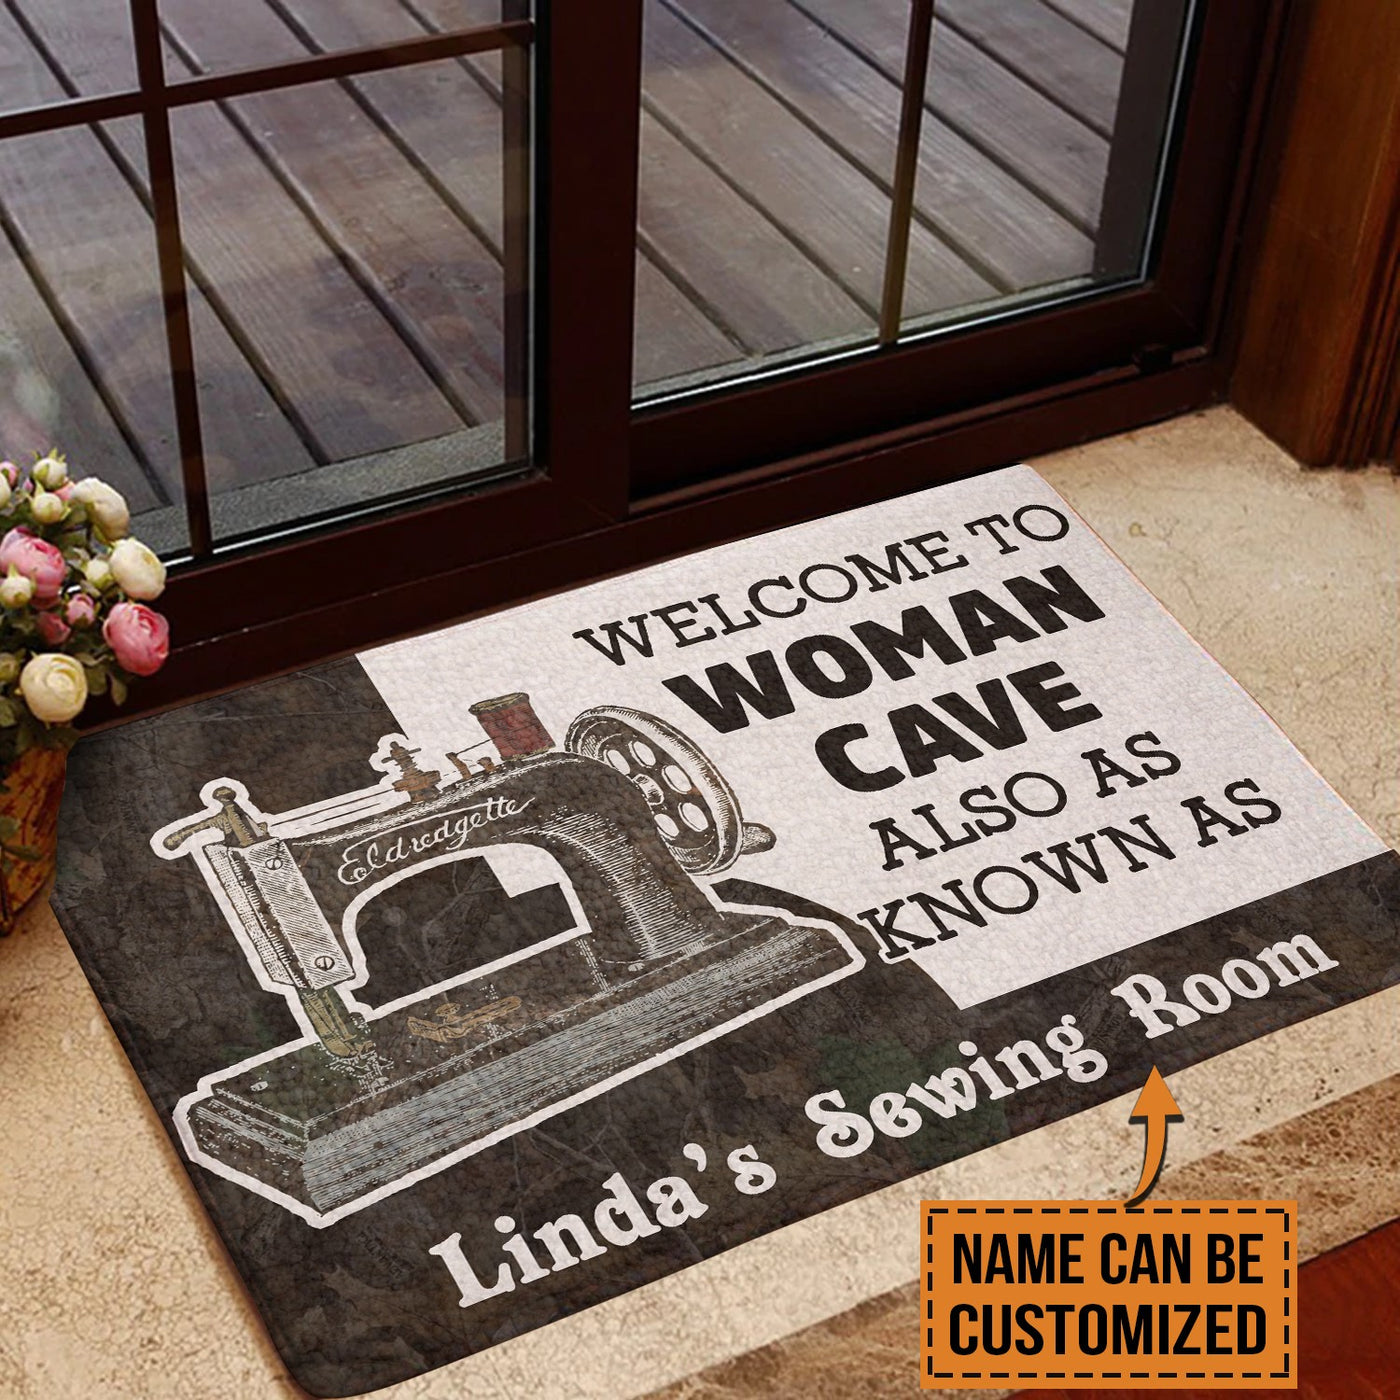 Welcome To Woman Cave Sewing Room Personalized - Doormat